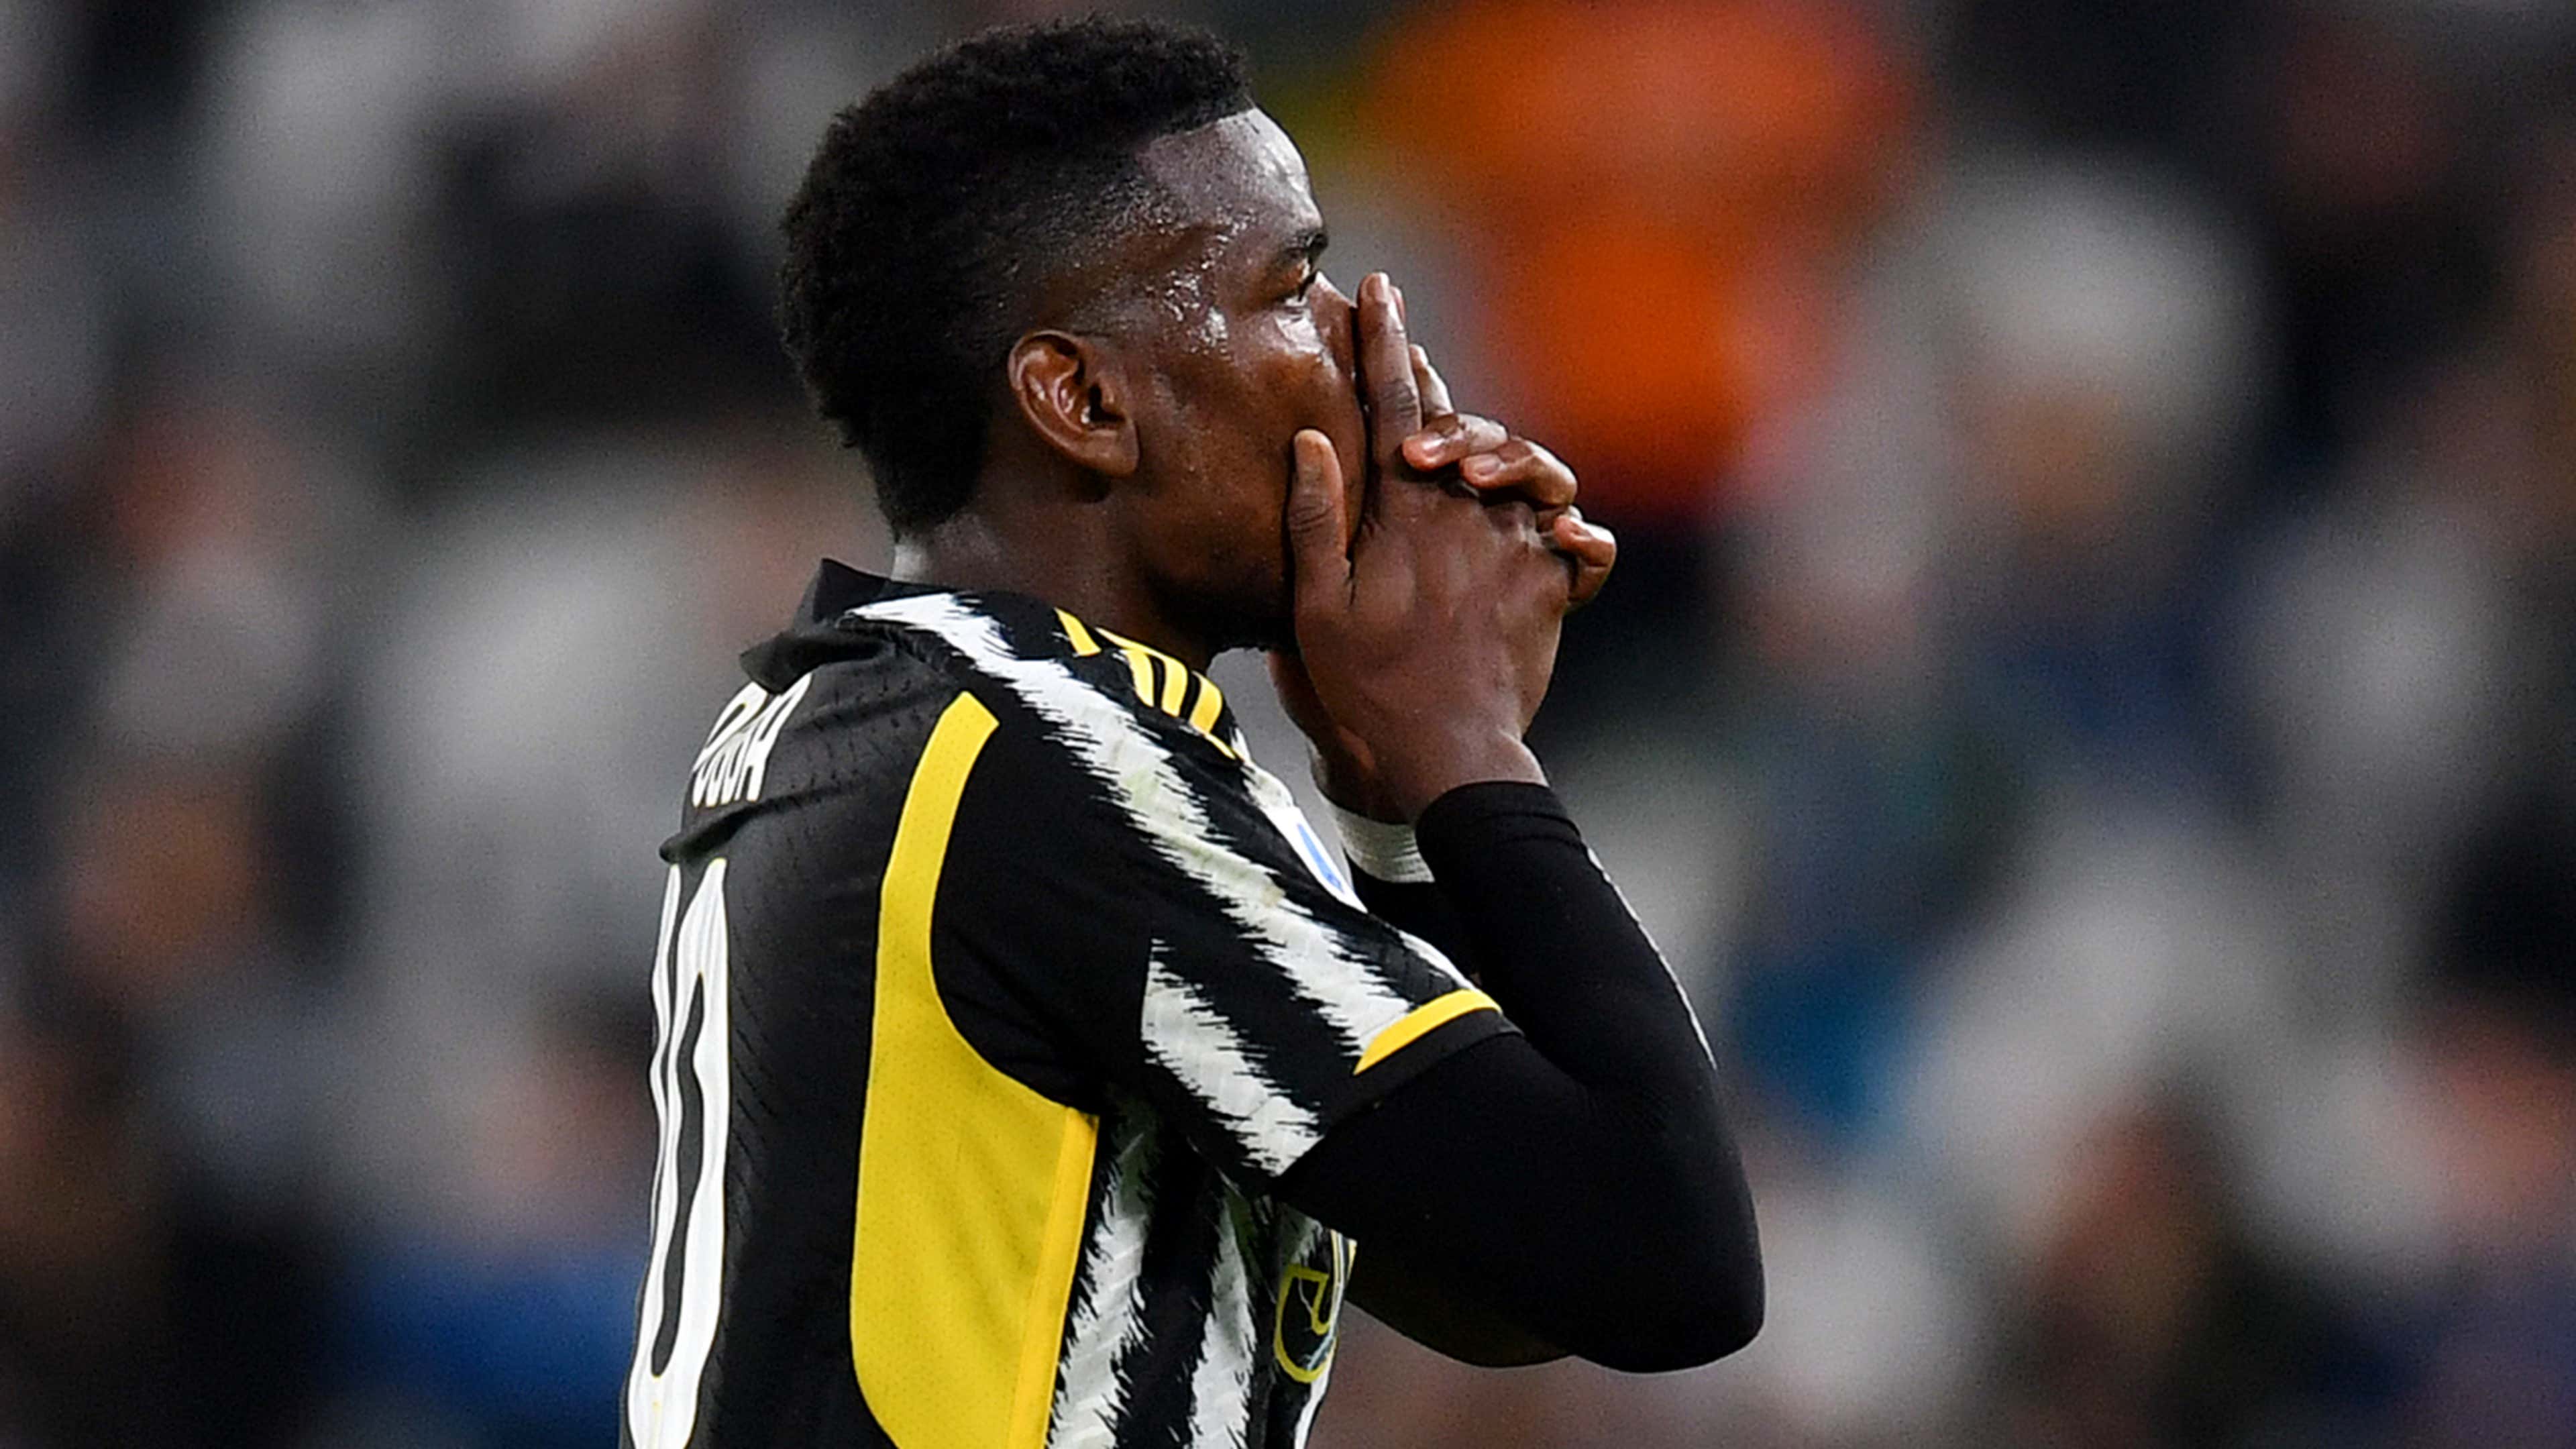 Massimiliano Allegri 'sad' to see Paul Pogba 'risks' backfire as Juventus midfielder suffers another injury 23 minutes into first start for 390 days | Goal.com